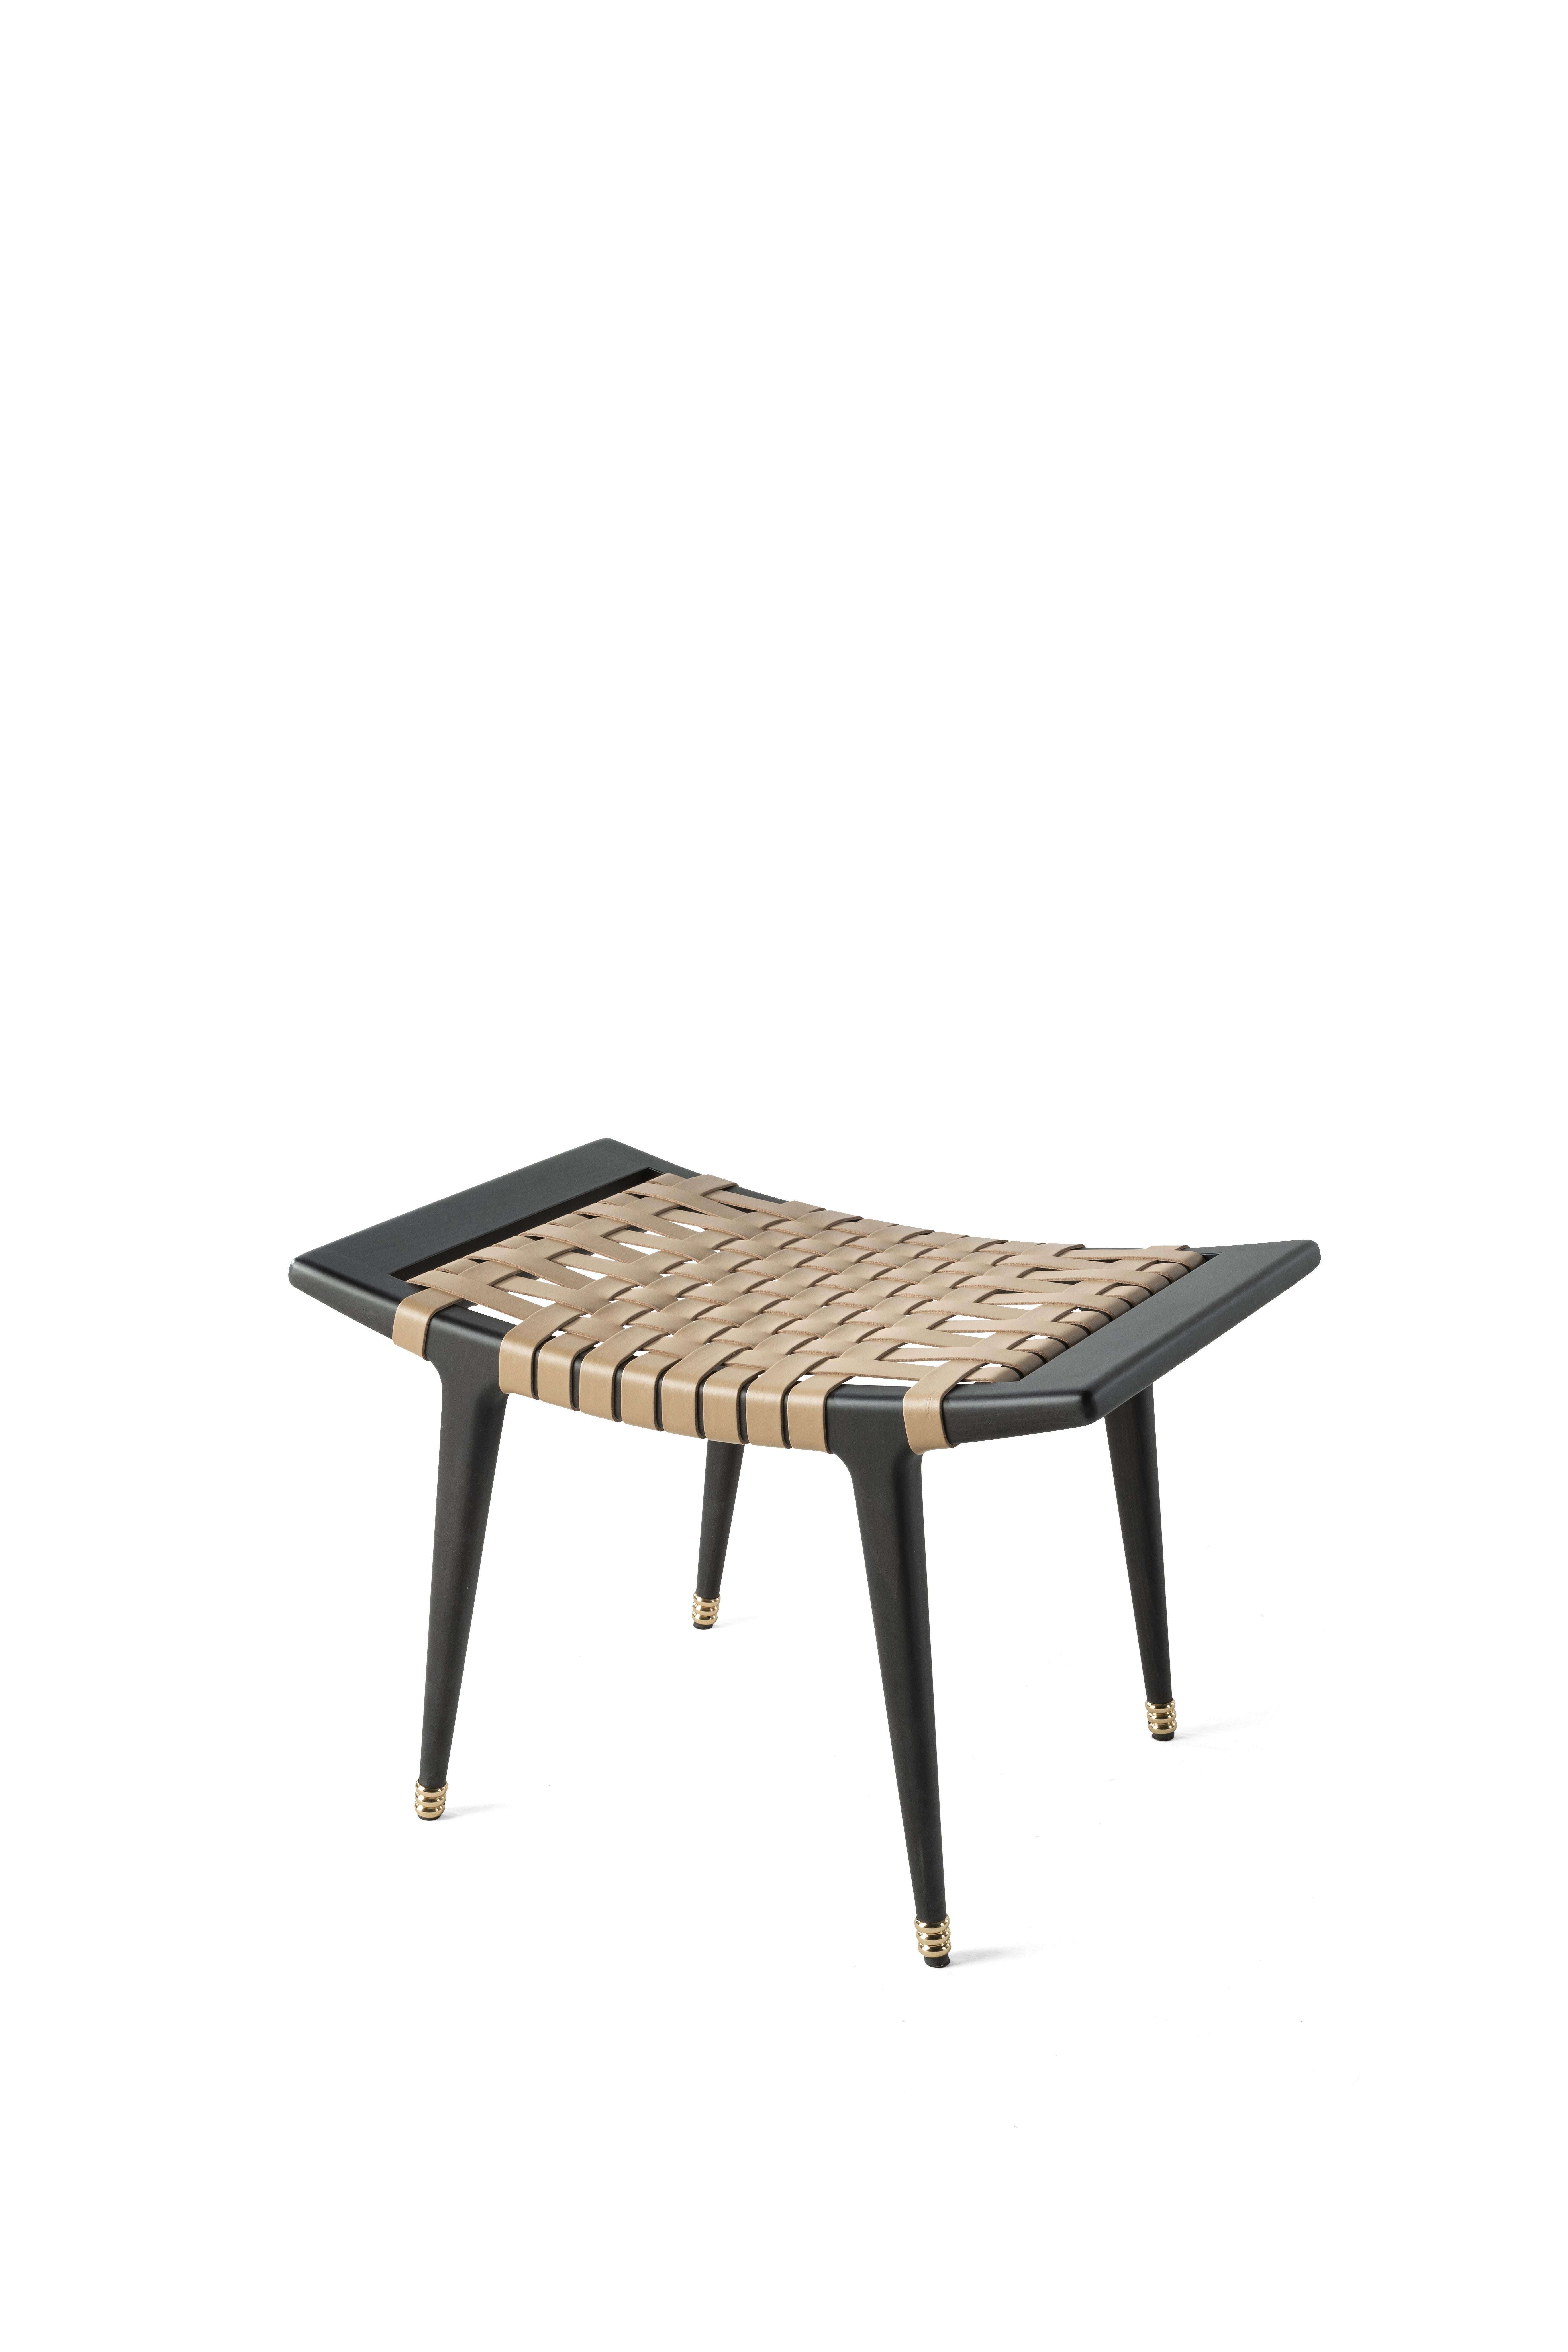 The leather twist is the main feature of the Dinka stool. The African inspiration is present in the matt finishing of the dark wengé dyed wood, in the polished brass rings and in the warm colors evoking the dry lands of the savannah.
Dinka stool